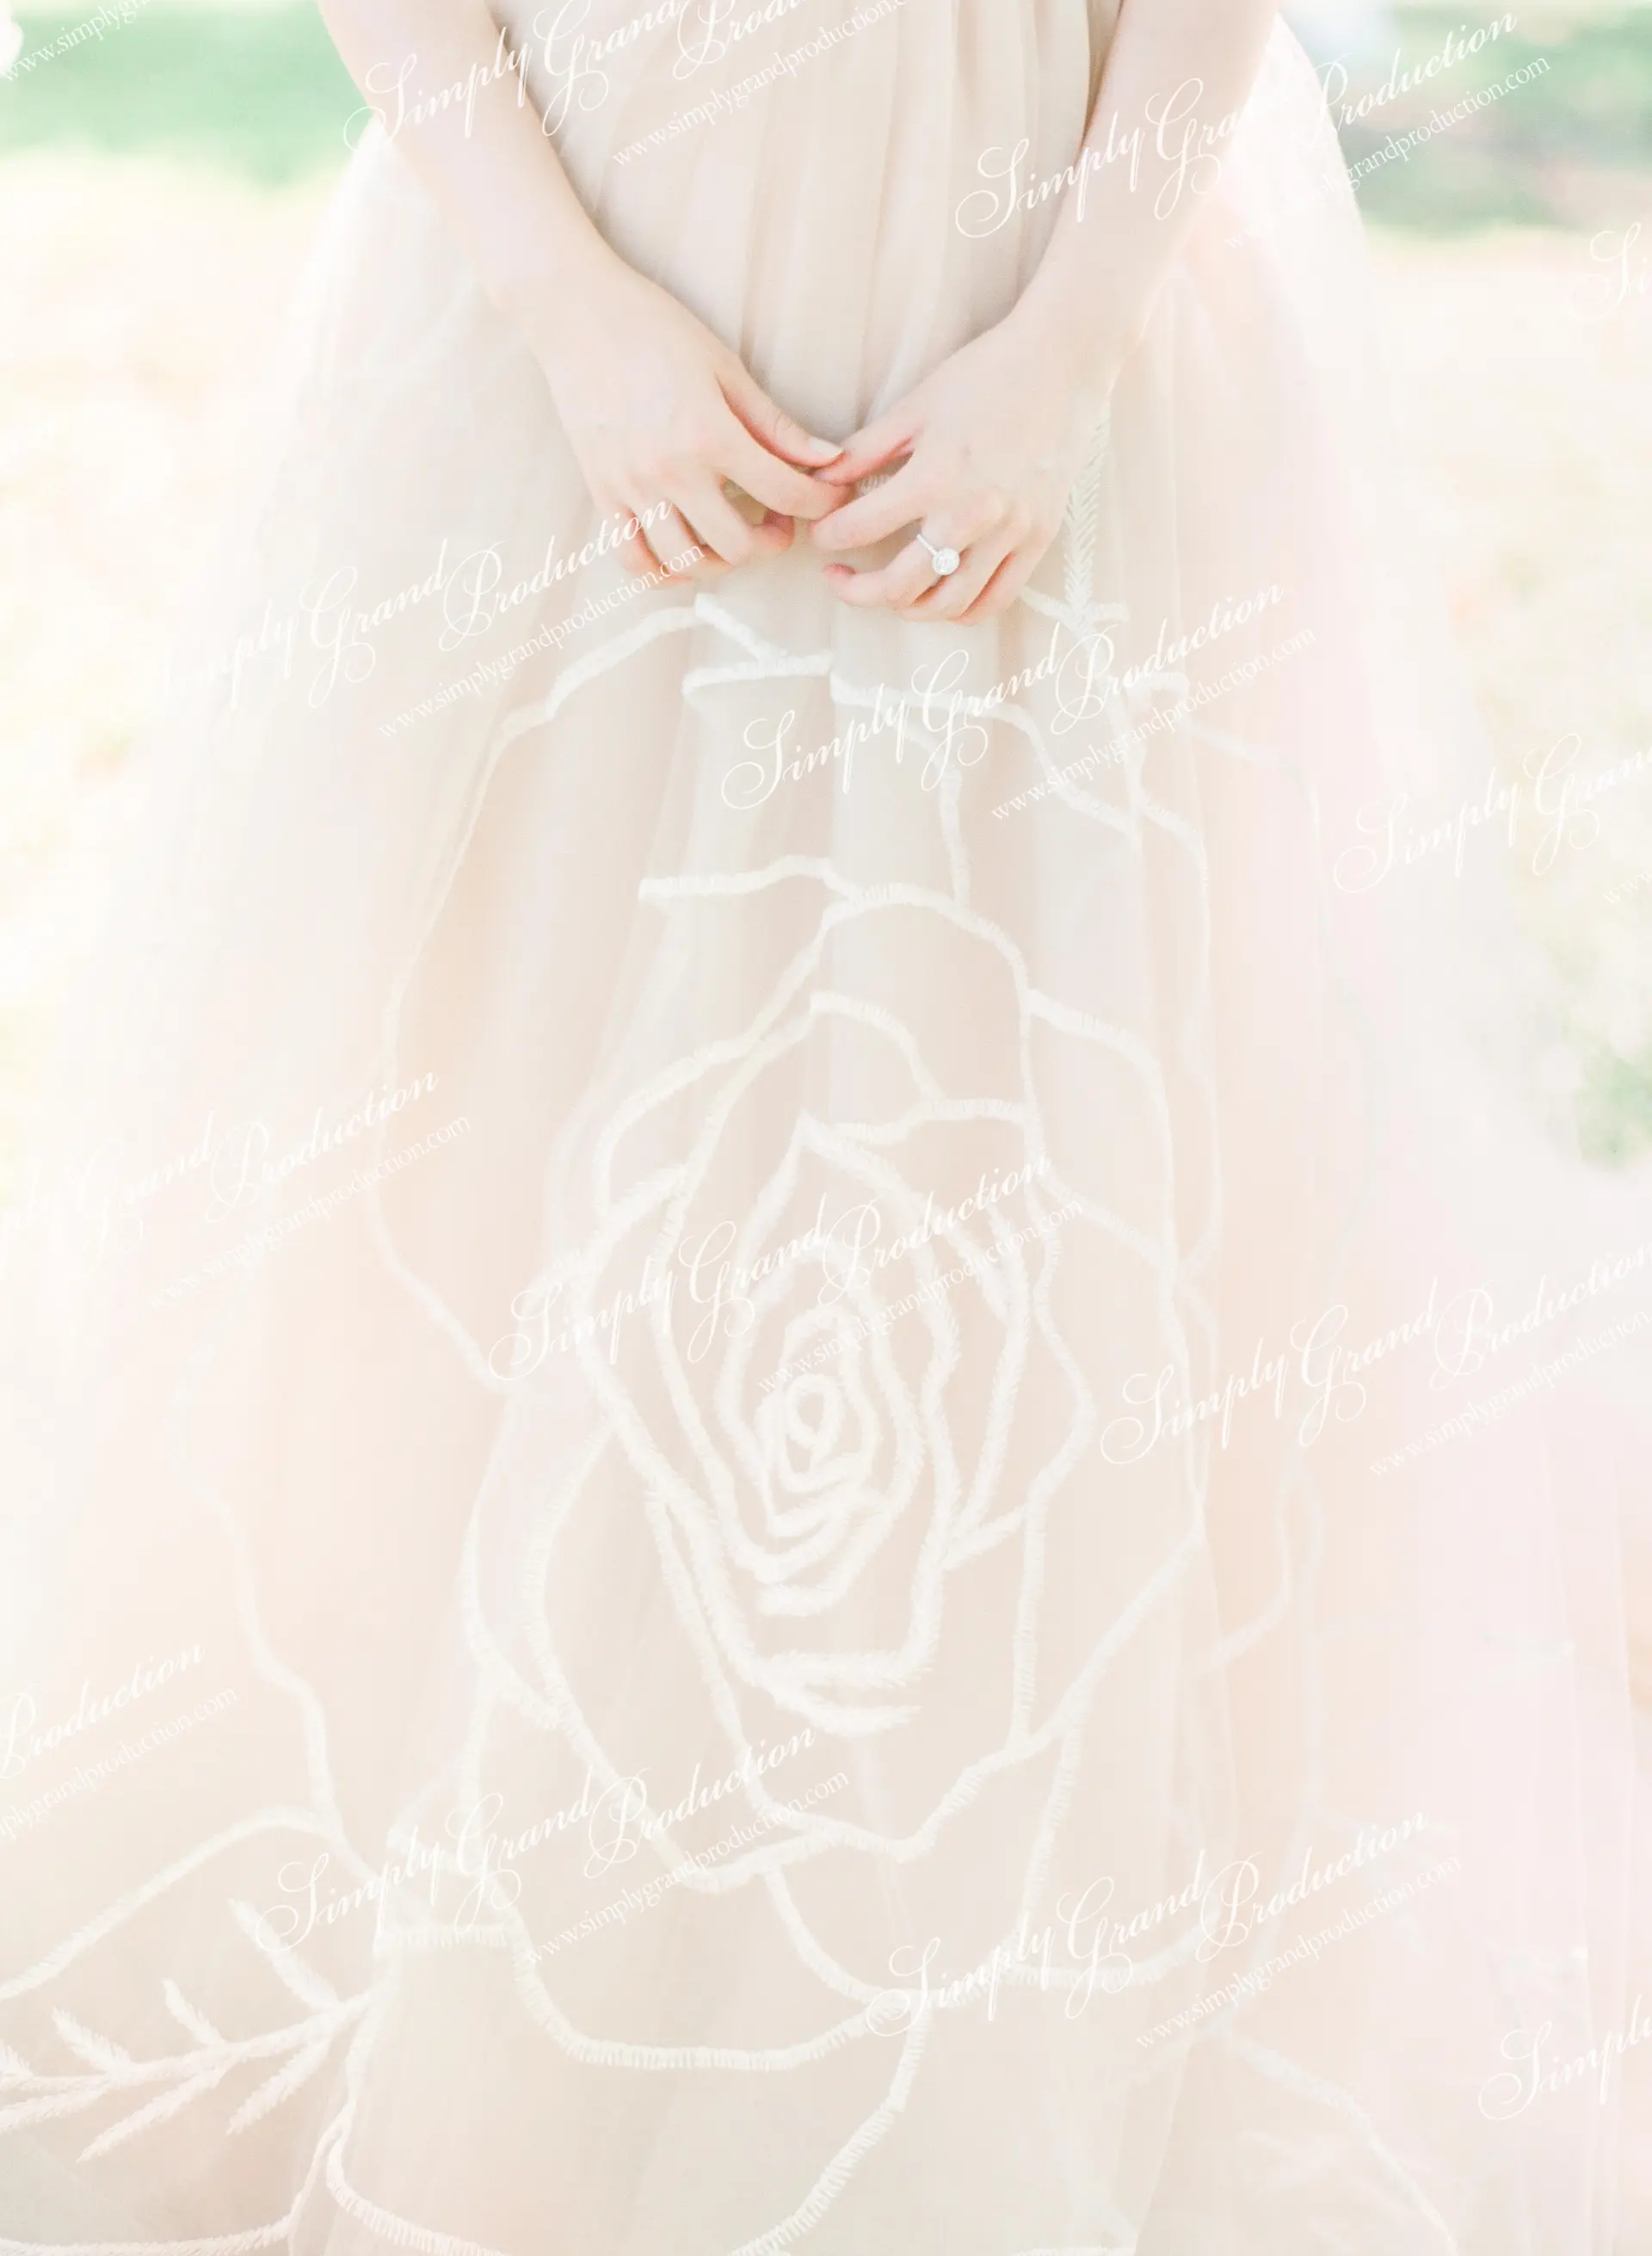 Simply_Grand_Production_Outdoor_wedding_decoration_photoshoot_Adventist_College_ring_elegant_gown_2_6.jpg